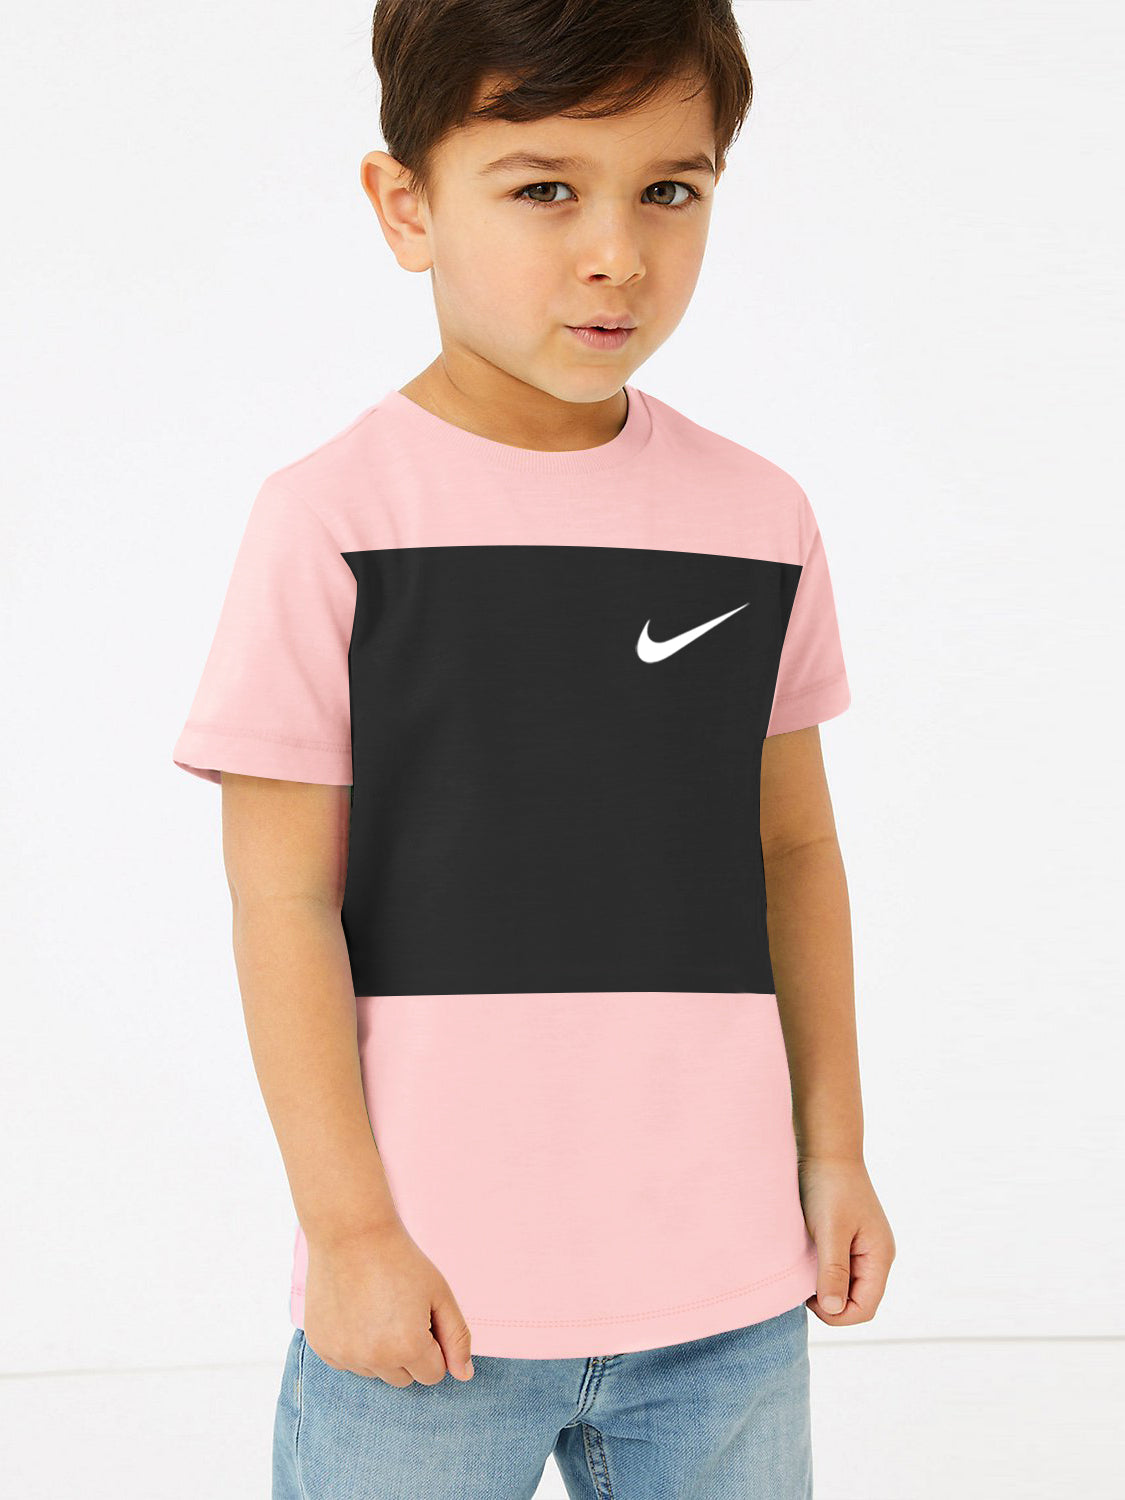 NK Crew Neck Single Jersey Tee Shirt For Kids-Pink with Black Panel-SP2224